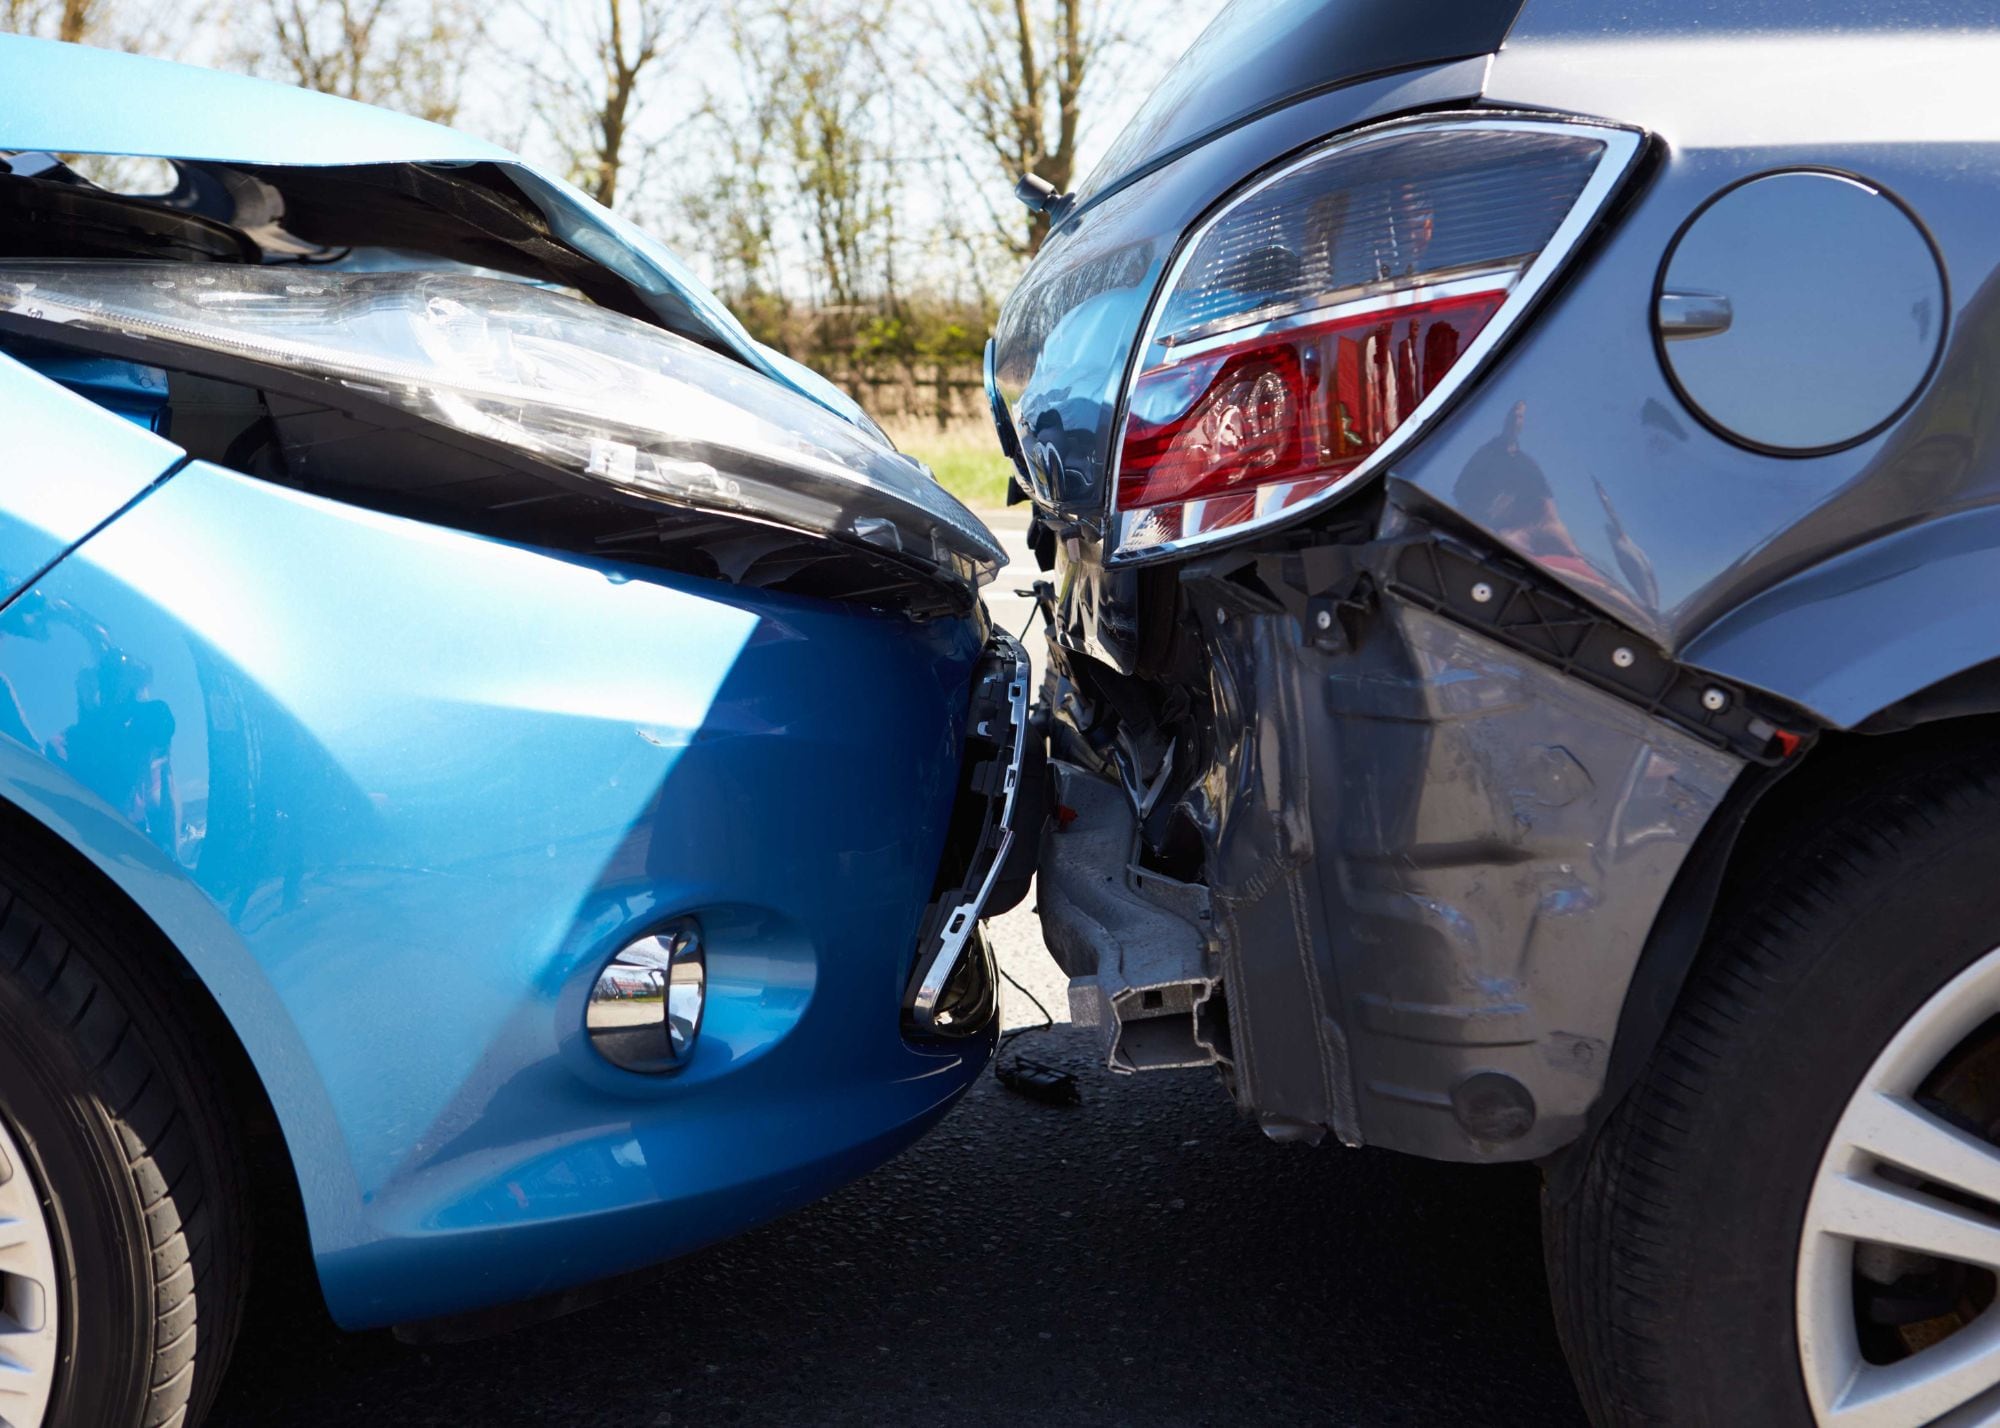 Understanding just what is SR22 Car Accident Insurance options for Fargo residents